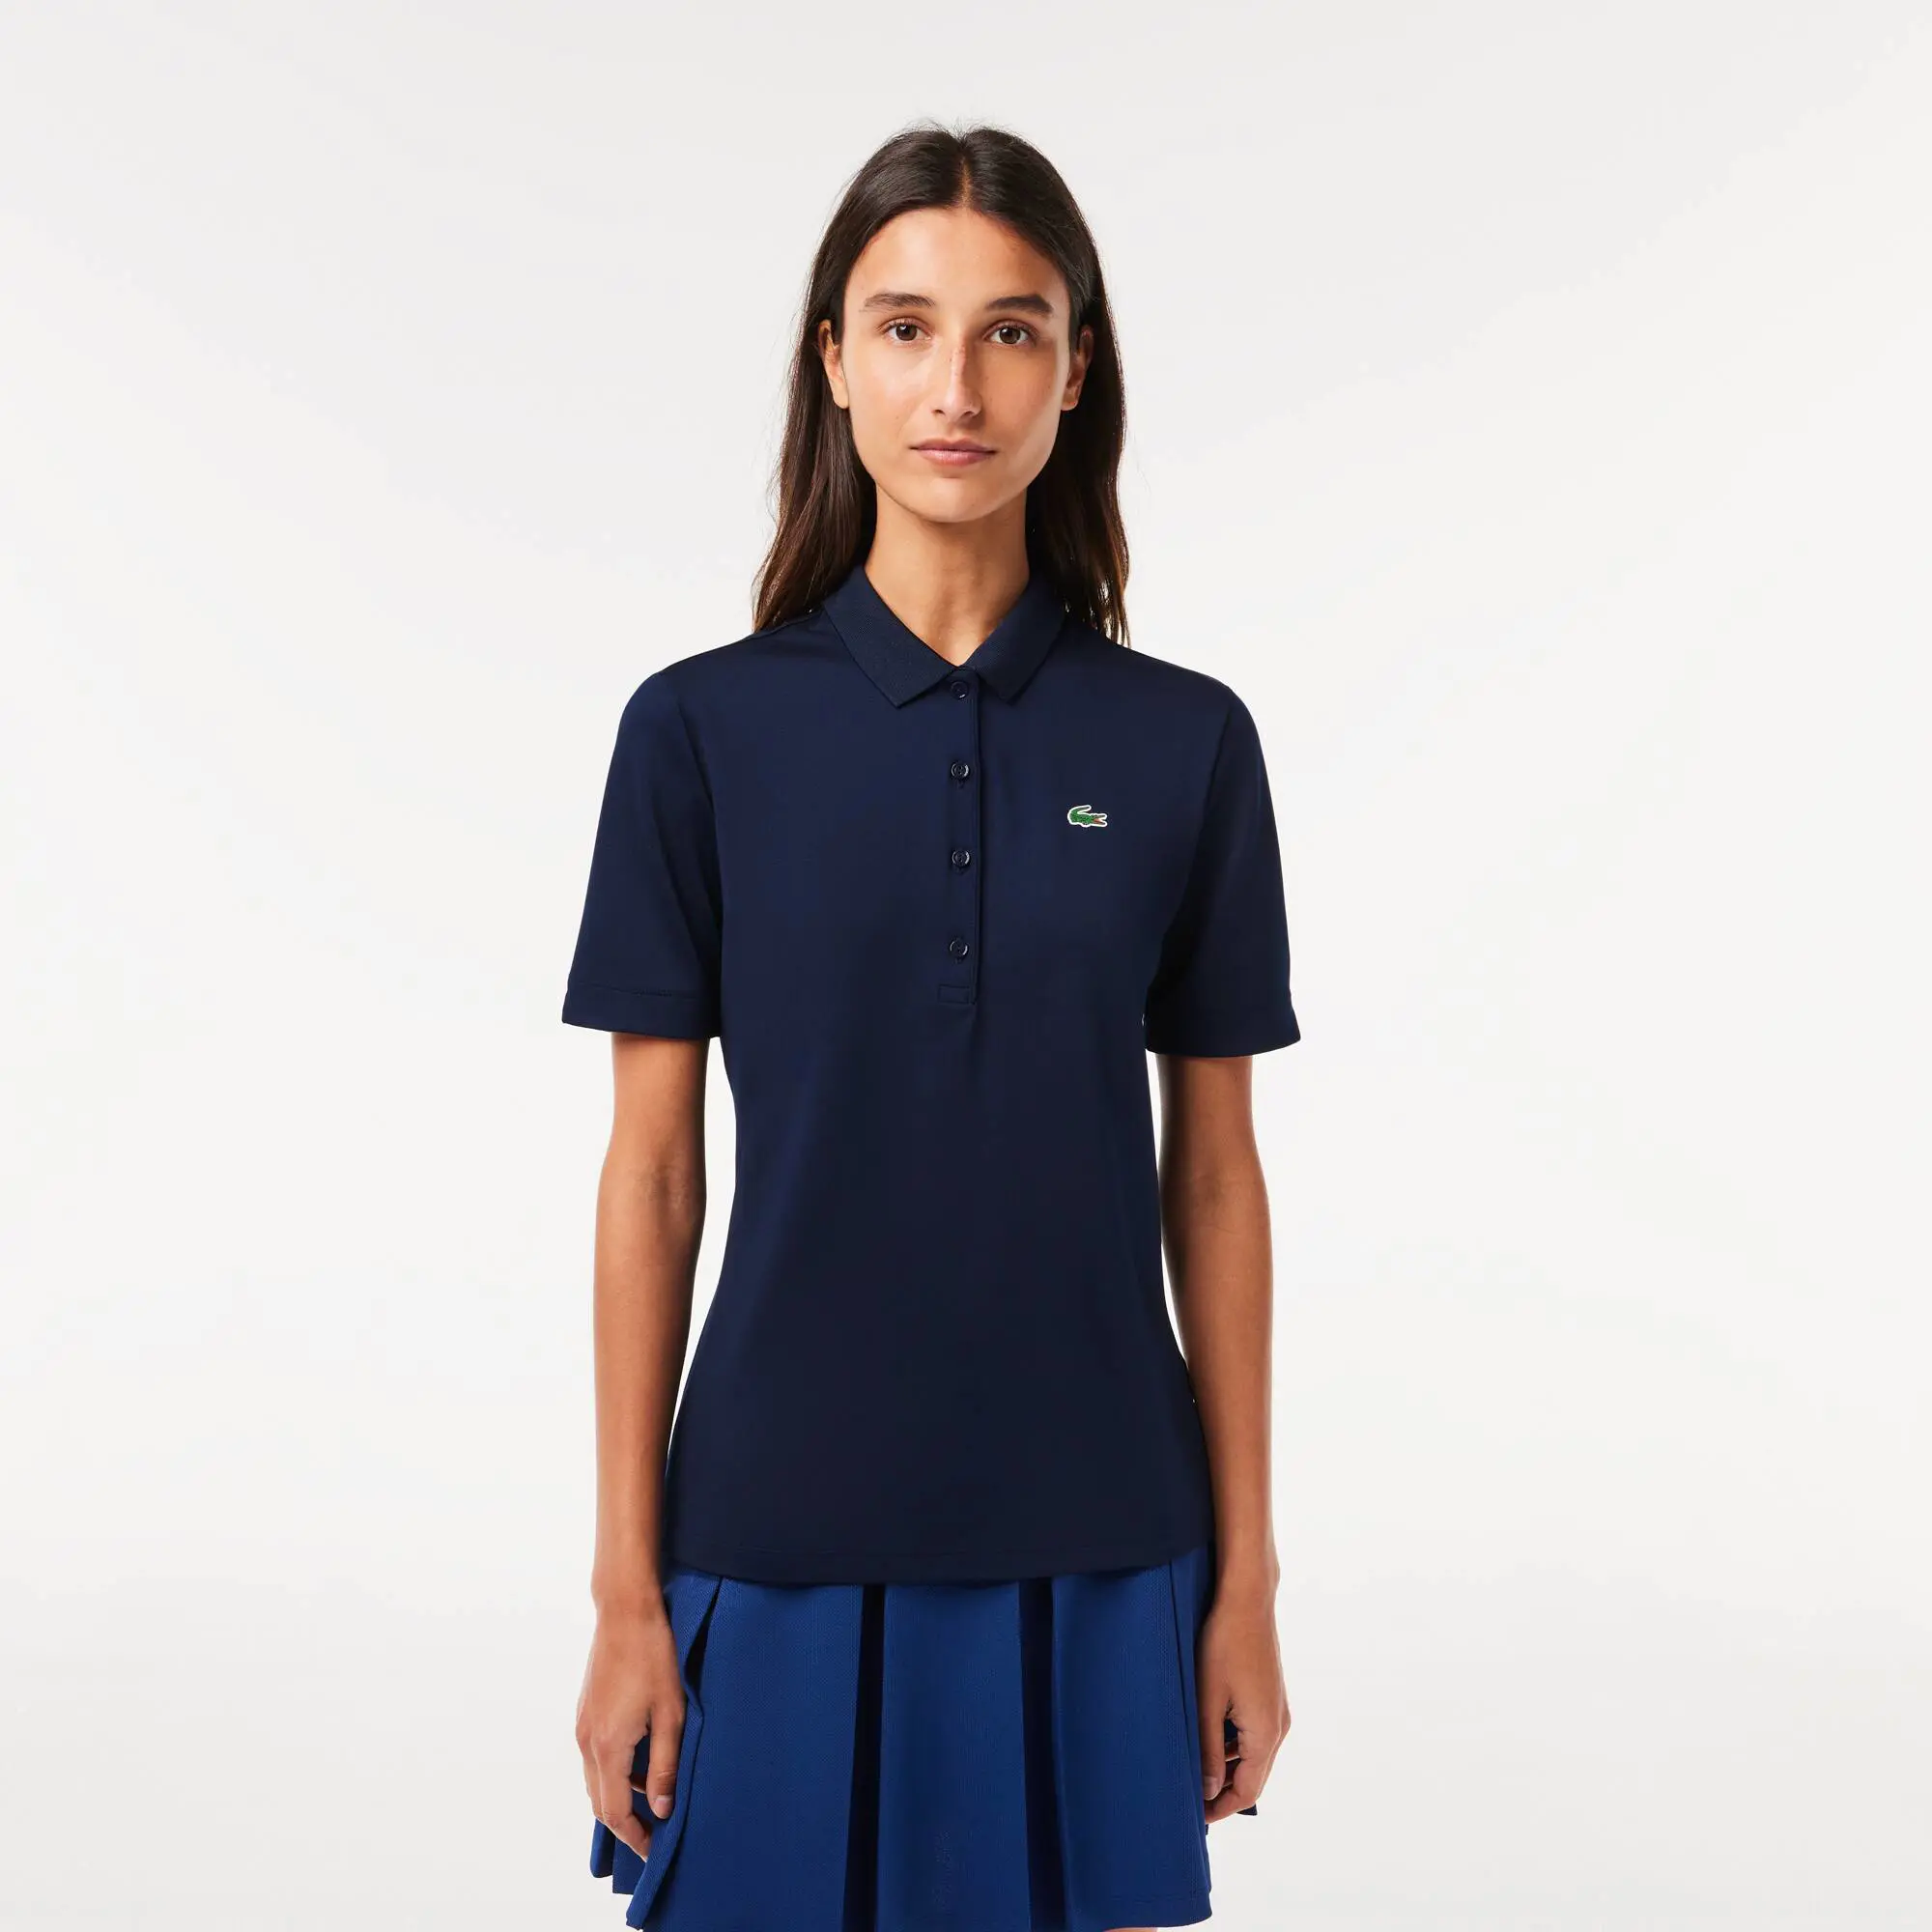 Lacoste Women's Lacoste SPORT Breathable Stretch Golf Polo Shirt. 1